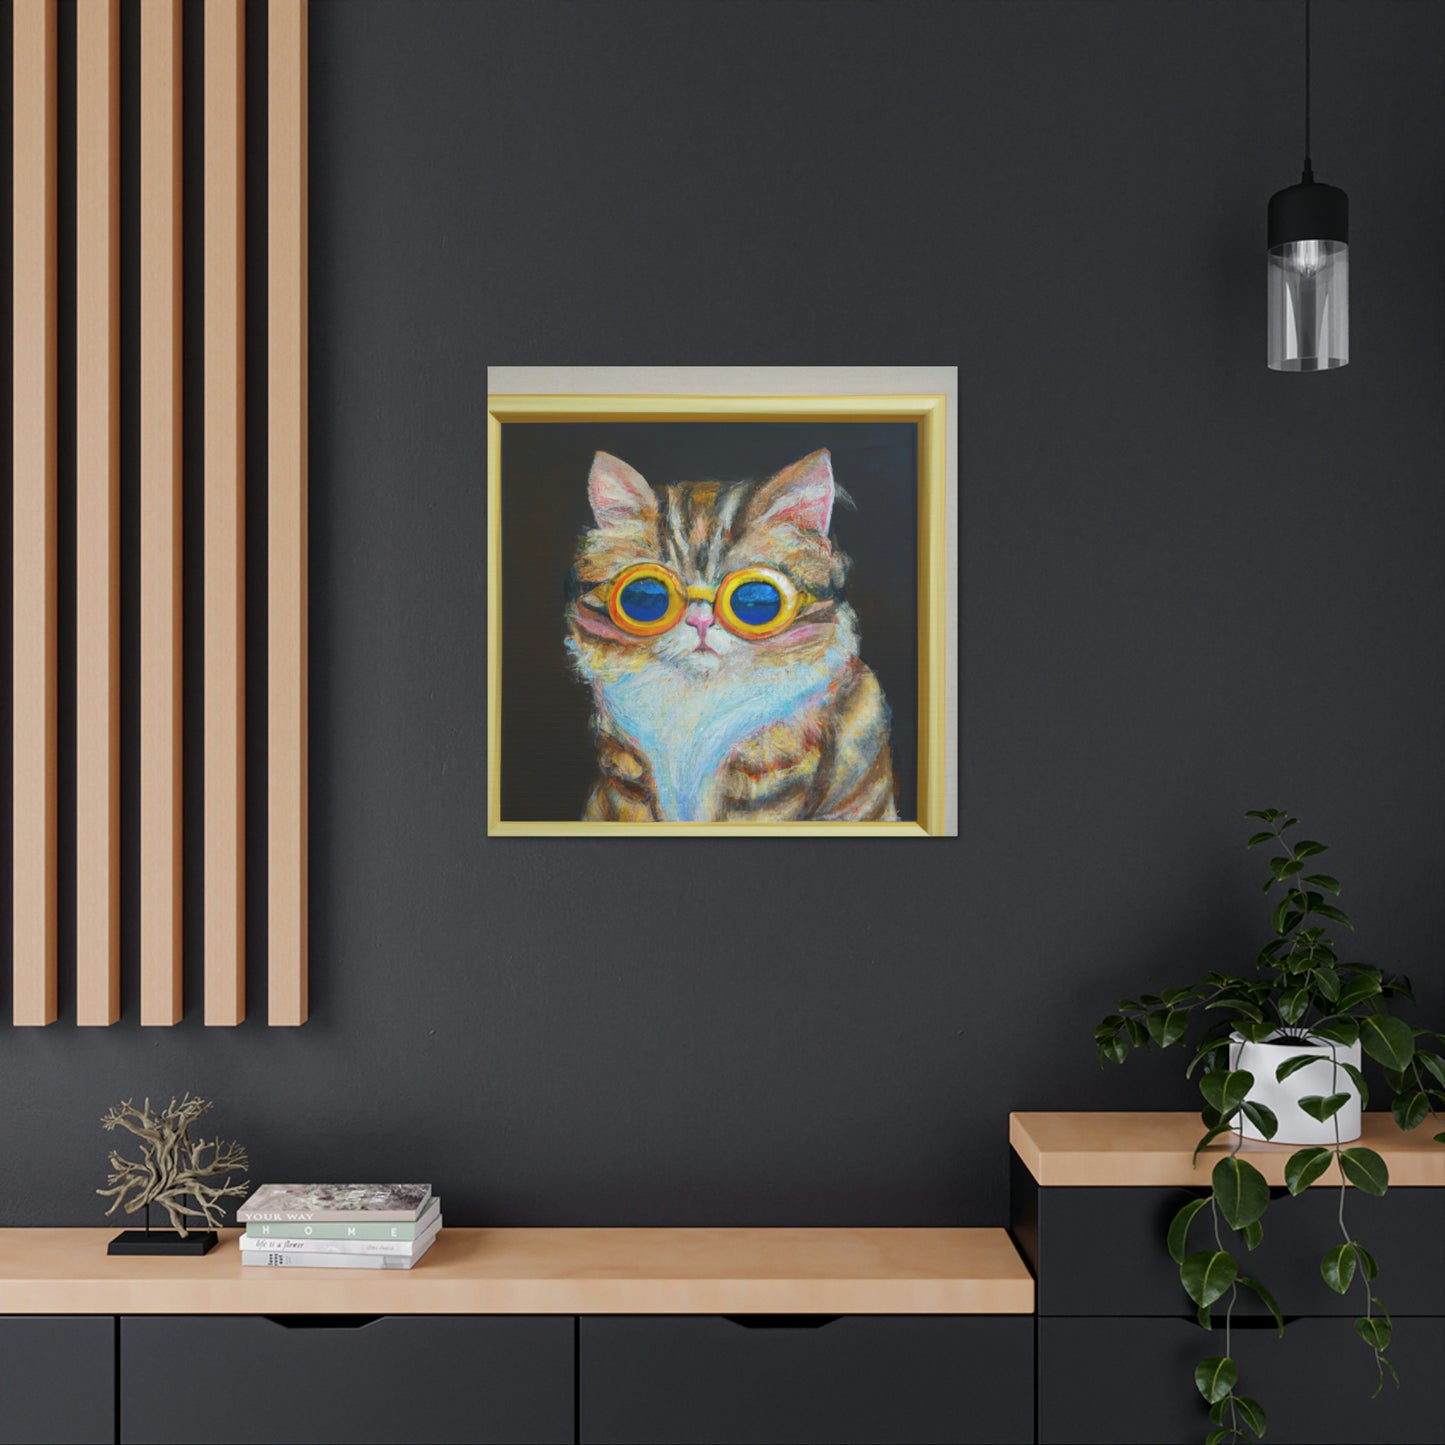 Sandy Paws. - Cat Lovers Canvas Wall Art